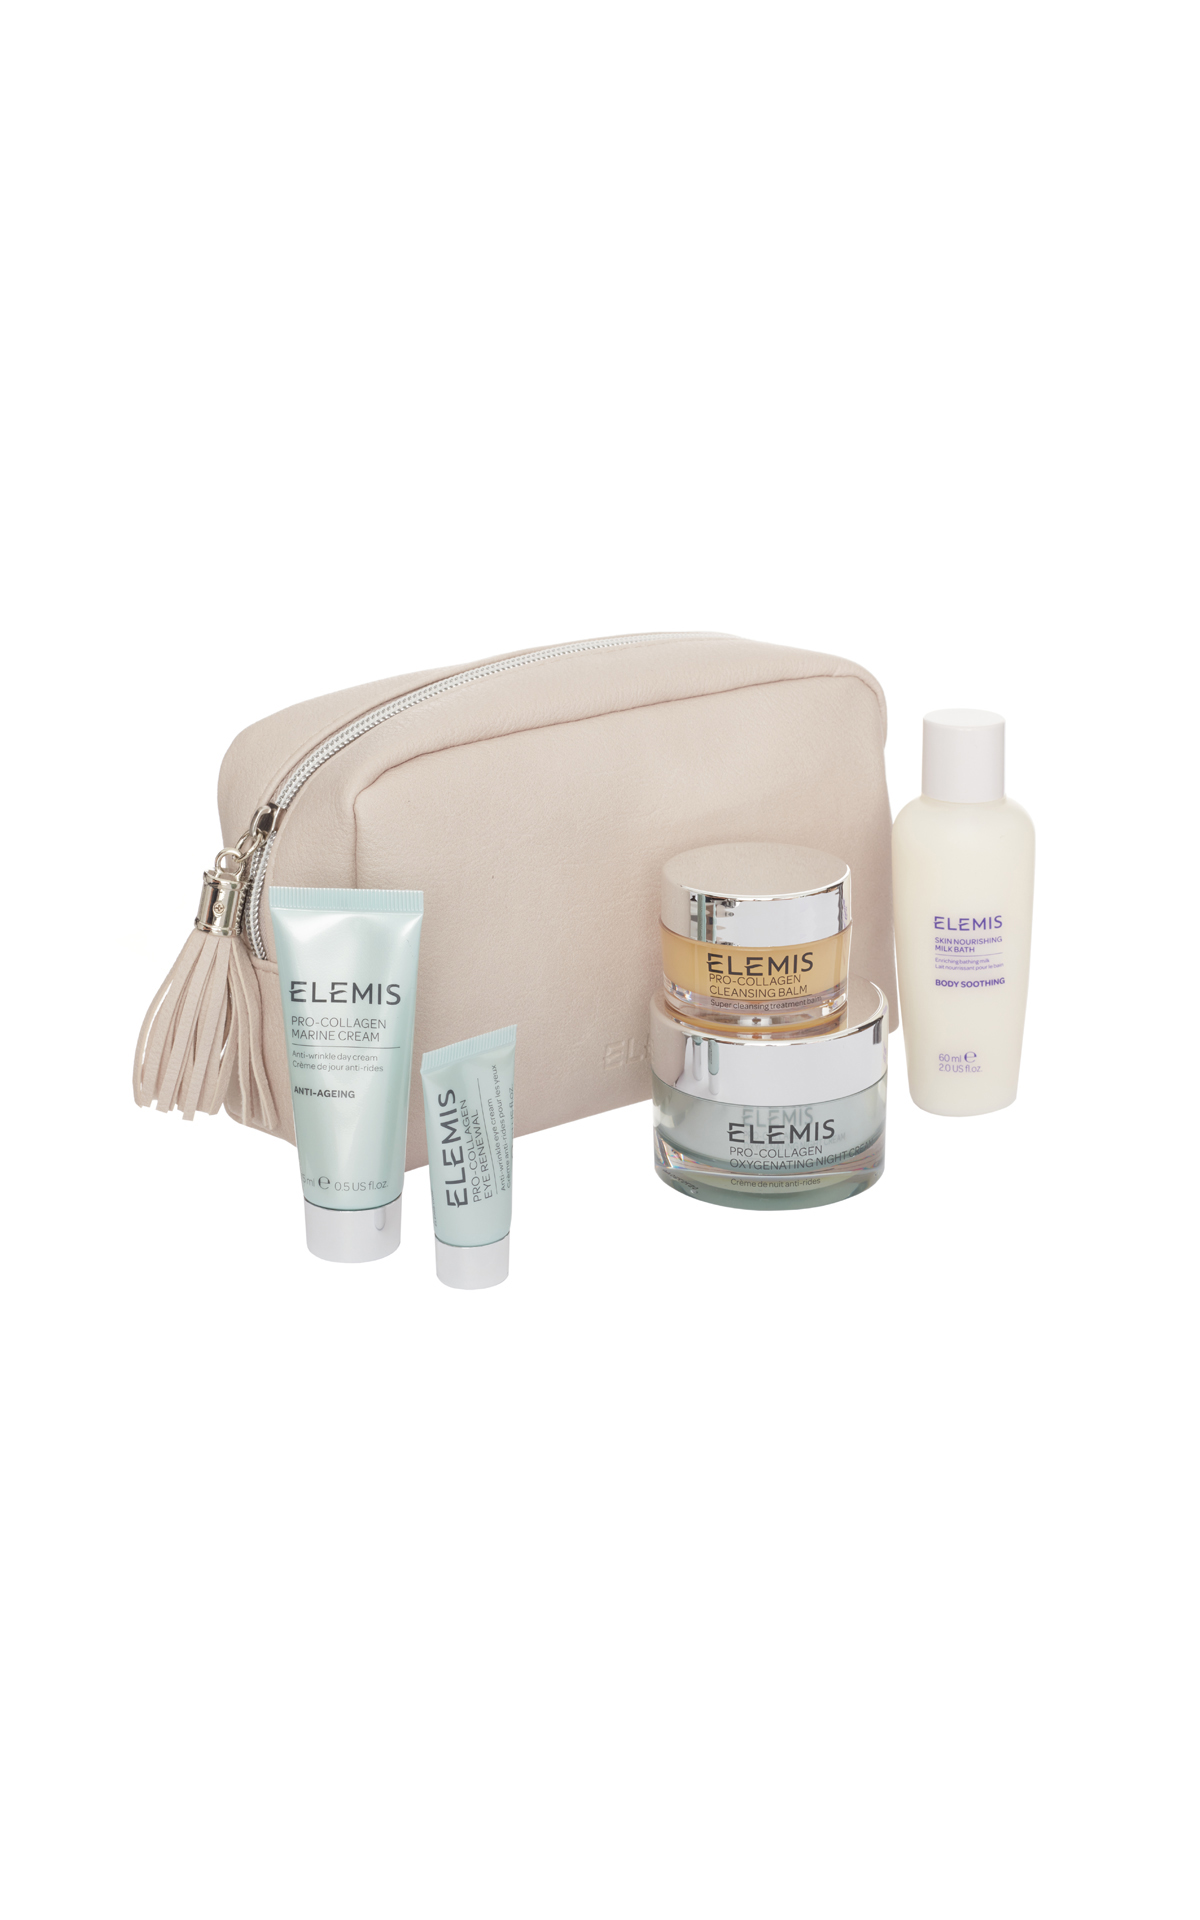 ELEMIS The night collection from Bicester Village